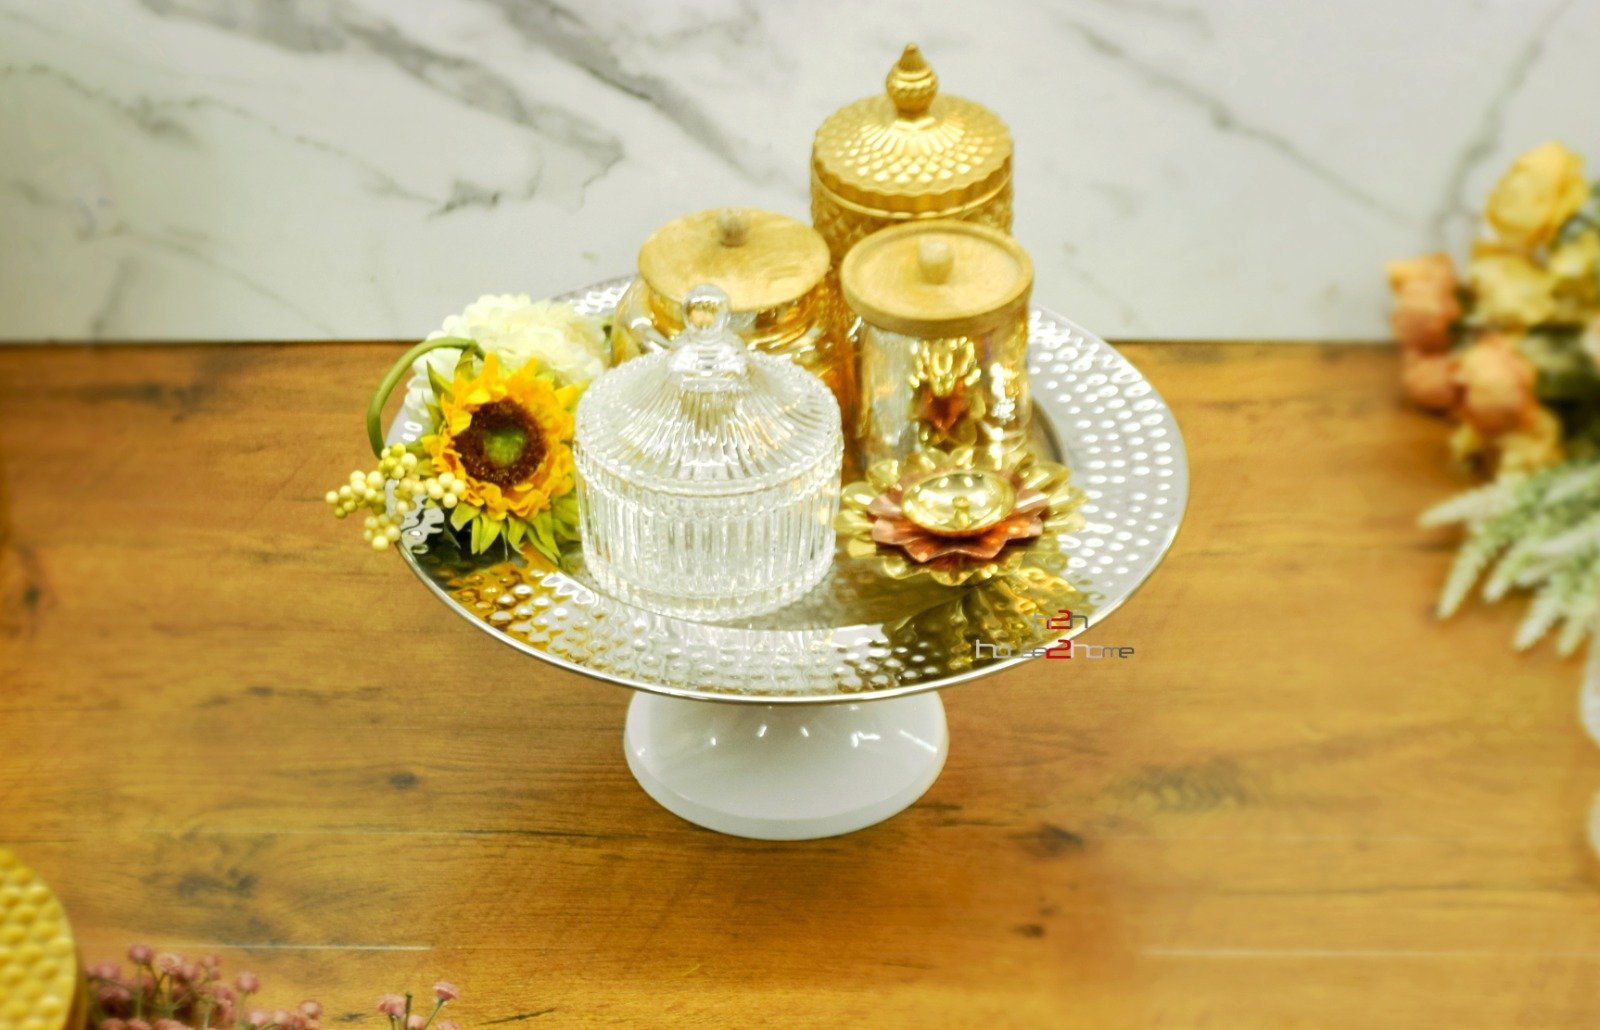 Fruit Stand, Cake Stand, Dry Fruit Stand, Hamper Packing, Serving Platter, Wedding Gift, house2home, h2h, 1 tier stand, Steel Cake Stand, Cake Stand, Steel Platter, Manufacturer, Best Handicraft manufacture, Best Metal Collection, Cake Stand, Chocolate Tray, cup cake stand, cute hamper, decor, decorative, decorative hamper, decorative packing, Diwali Decorations, Diwali Gift, diwali hamper, dry fruit box, dry fruit pack, Dry Fruit Packing, Dry Fruit Stand, dry fruit tray, Elegant Basket, elegant platter, Folding, Fruit Platter, Fruit Stand, Gift Basket, Gift box, Gift Distribution, gift pack, gifting, Gold, gold basket, Gold Hamper, Golden, Golden Wire Mesh, h2h, Hamper Basket, Hamper Box, Hamper Pack, Hamper Packing, handicraft, Handicrafts Manufacturer, handmade, Holiday Gift Hamper, Holiday Hamper, holiday pack, home decor, House 2 home, house warming, House2home, Househome, Kandi Basket, Low Transportation Cost, Metal Gifts Manufacturer, Metal Handicraft, Metal Handicrafts, Metal TRay, Metal Wire Box, Modern Candle Holder, modern hamper, Moradabad, Moradabad Metal, net mesh hamper, Packaging Basket, Packing, Platter, Return Gift, room hamper, Serving Platter, Snack Serving Stand, Square Box, Square hamper Basket, square wire, stylish, tray, trousseau packing, truso packing, Wedding Gift, Wedding Hamper, Wedding Pack, Silver Cake Stand, Silver Hamper, Hammered Plate